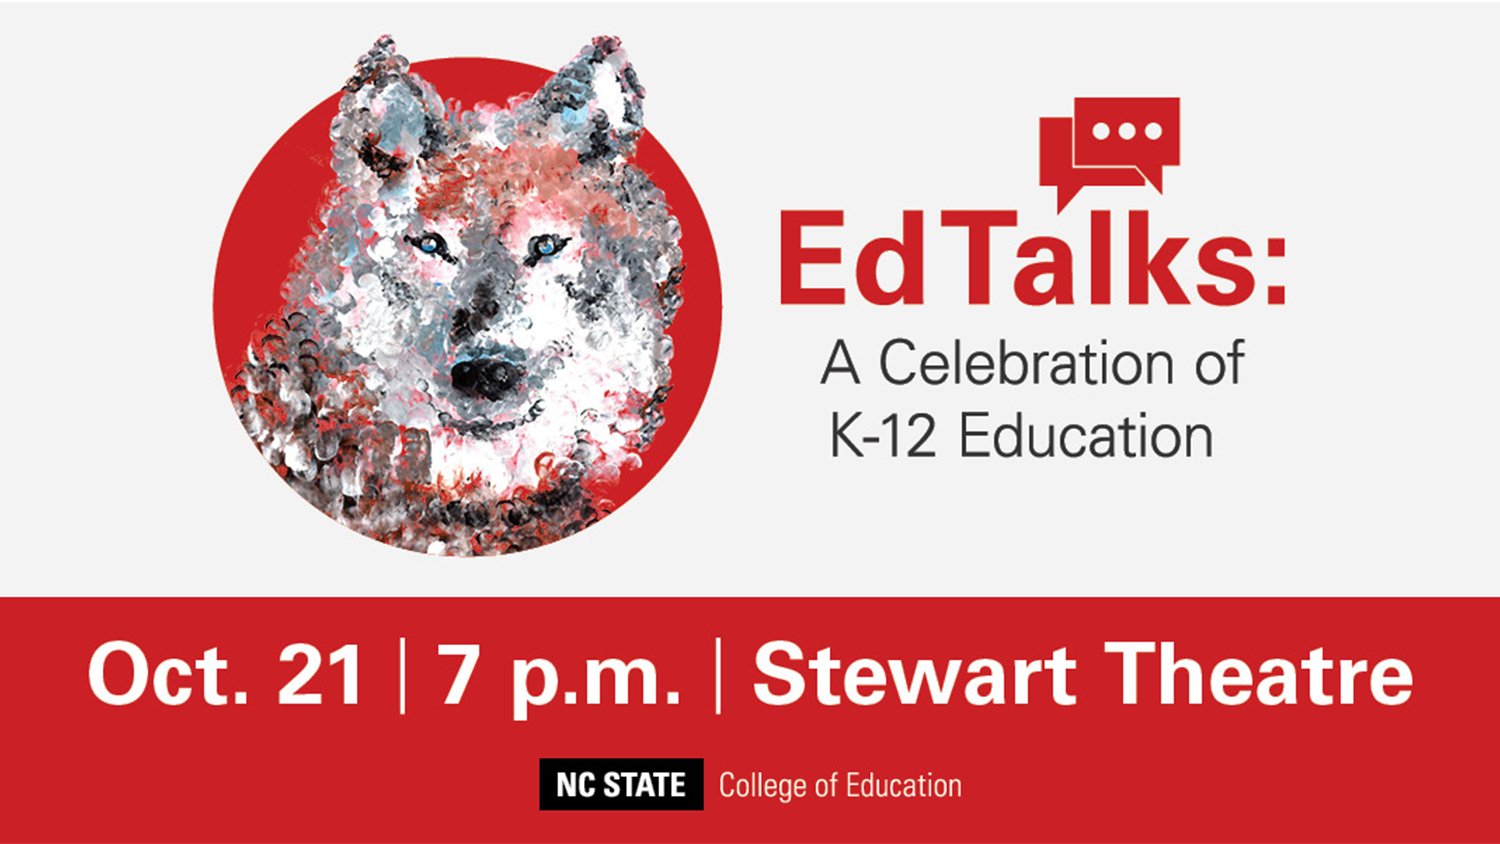 The NC State College of Education will hold inaugural EdTalks 2019.